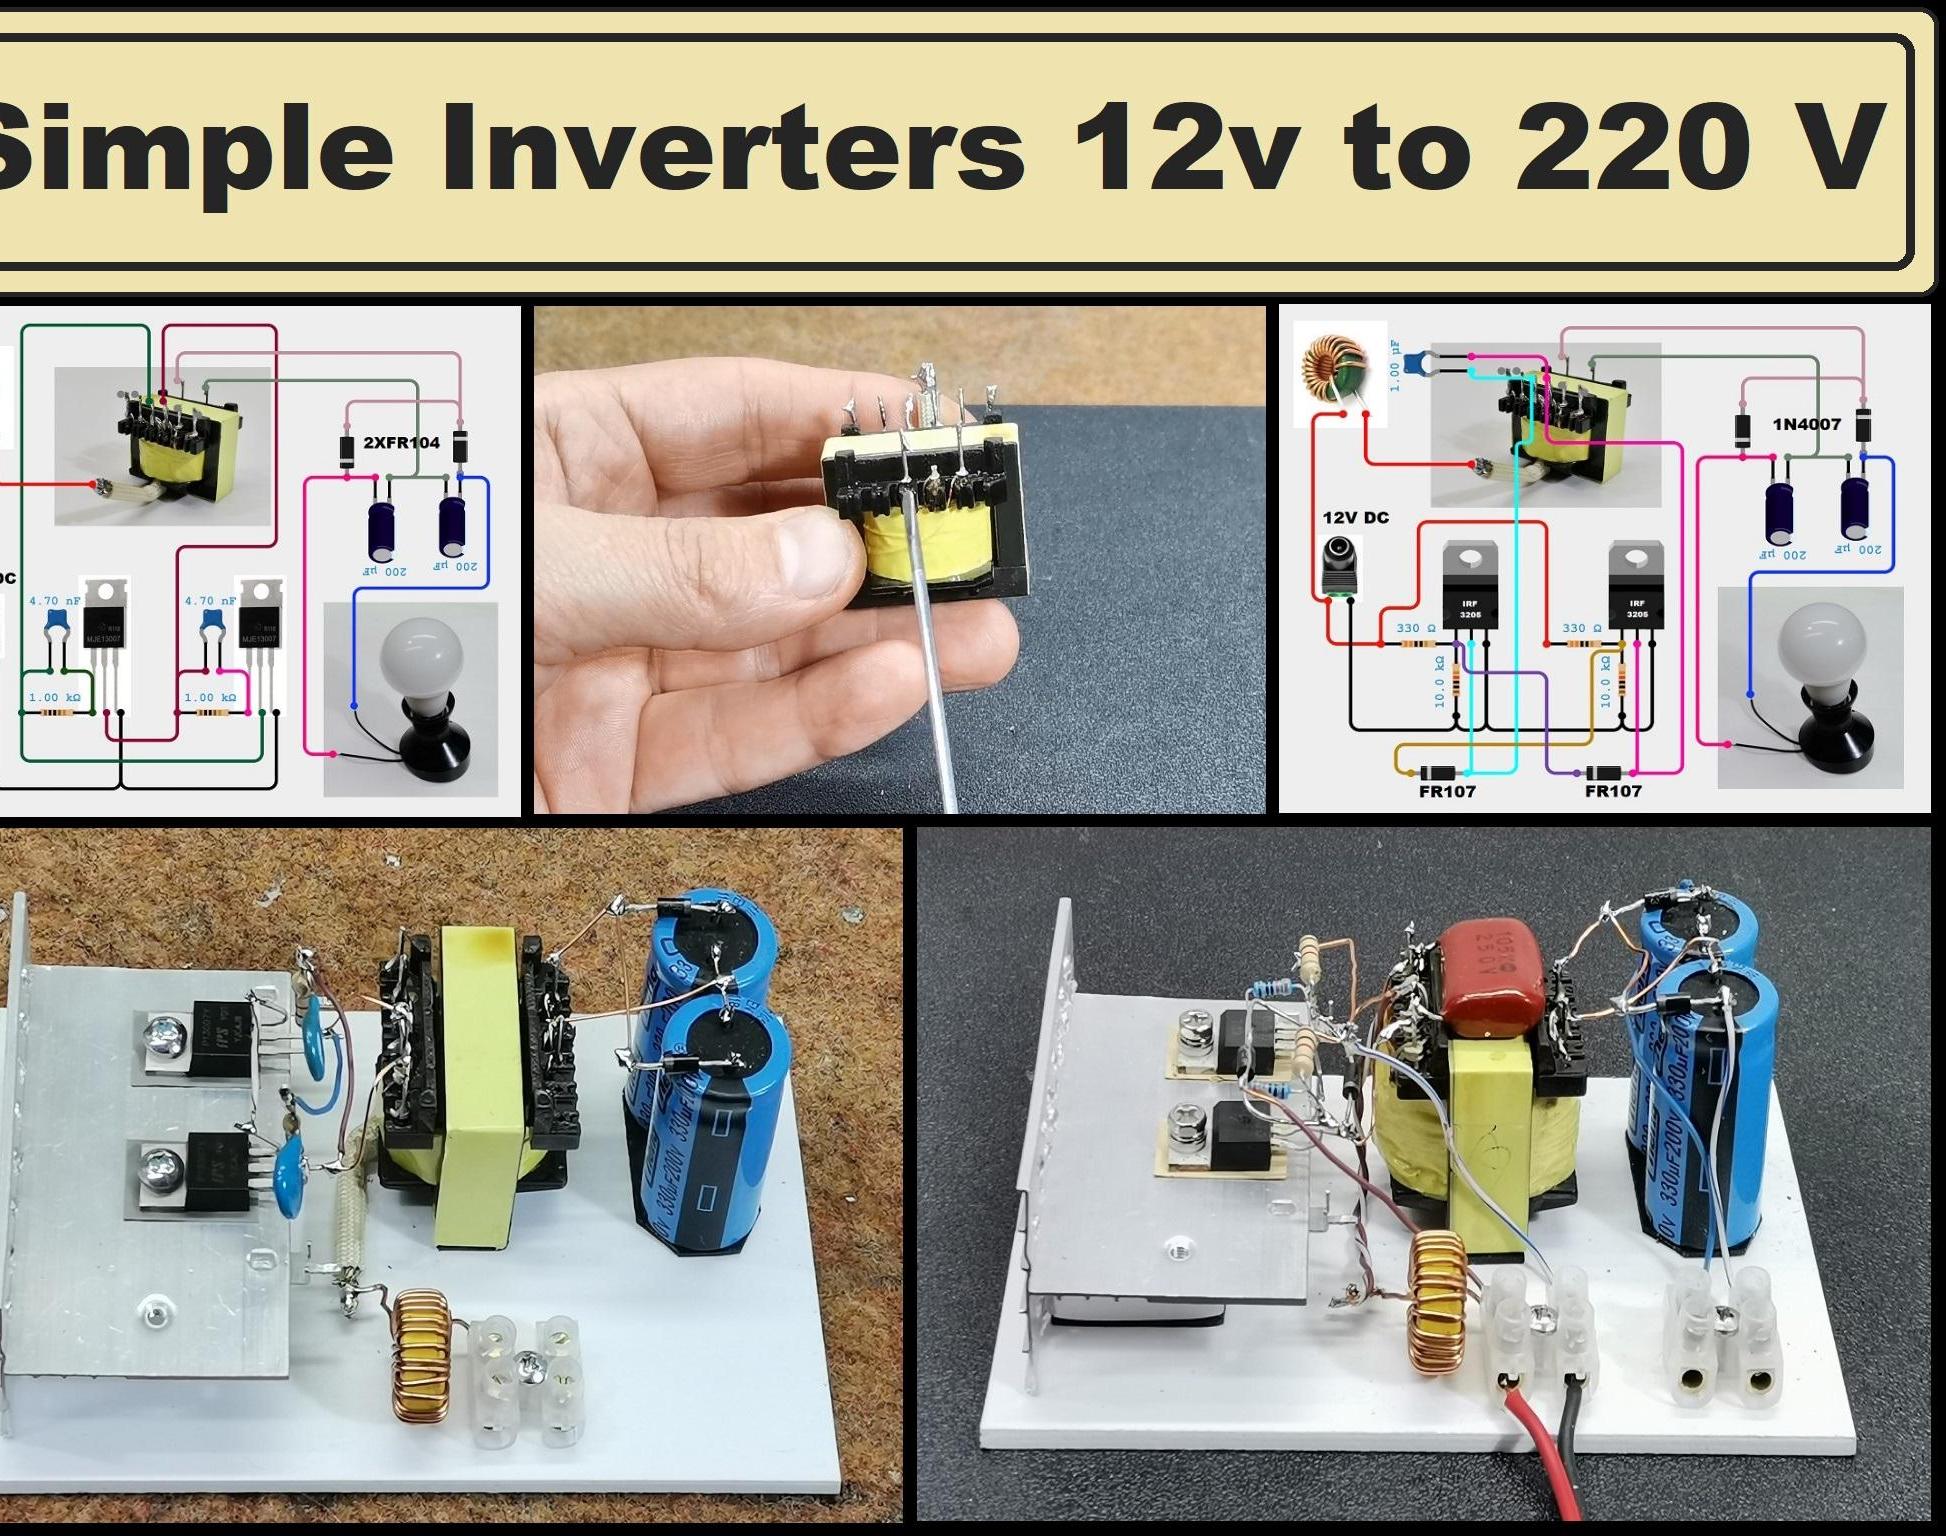 Simple Inverters 12V to 220V , Comparision, Testing, and Real Characteristics